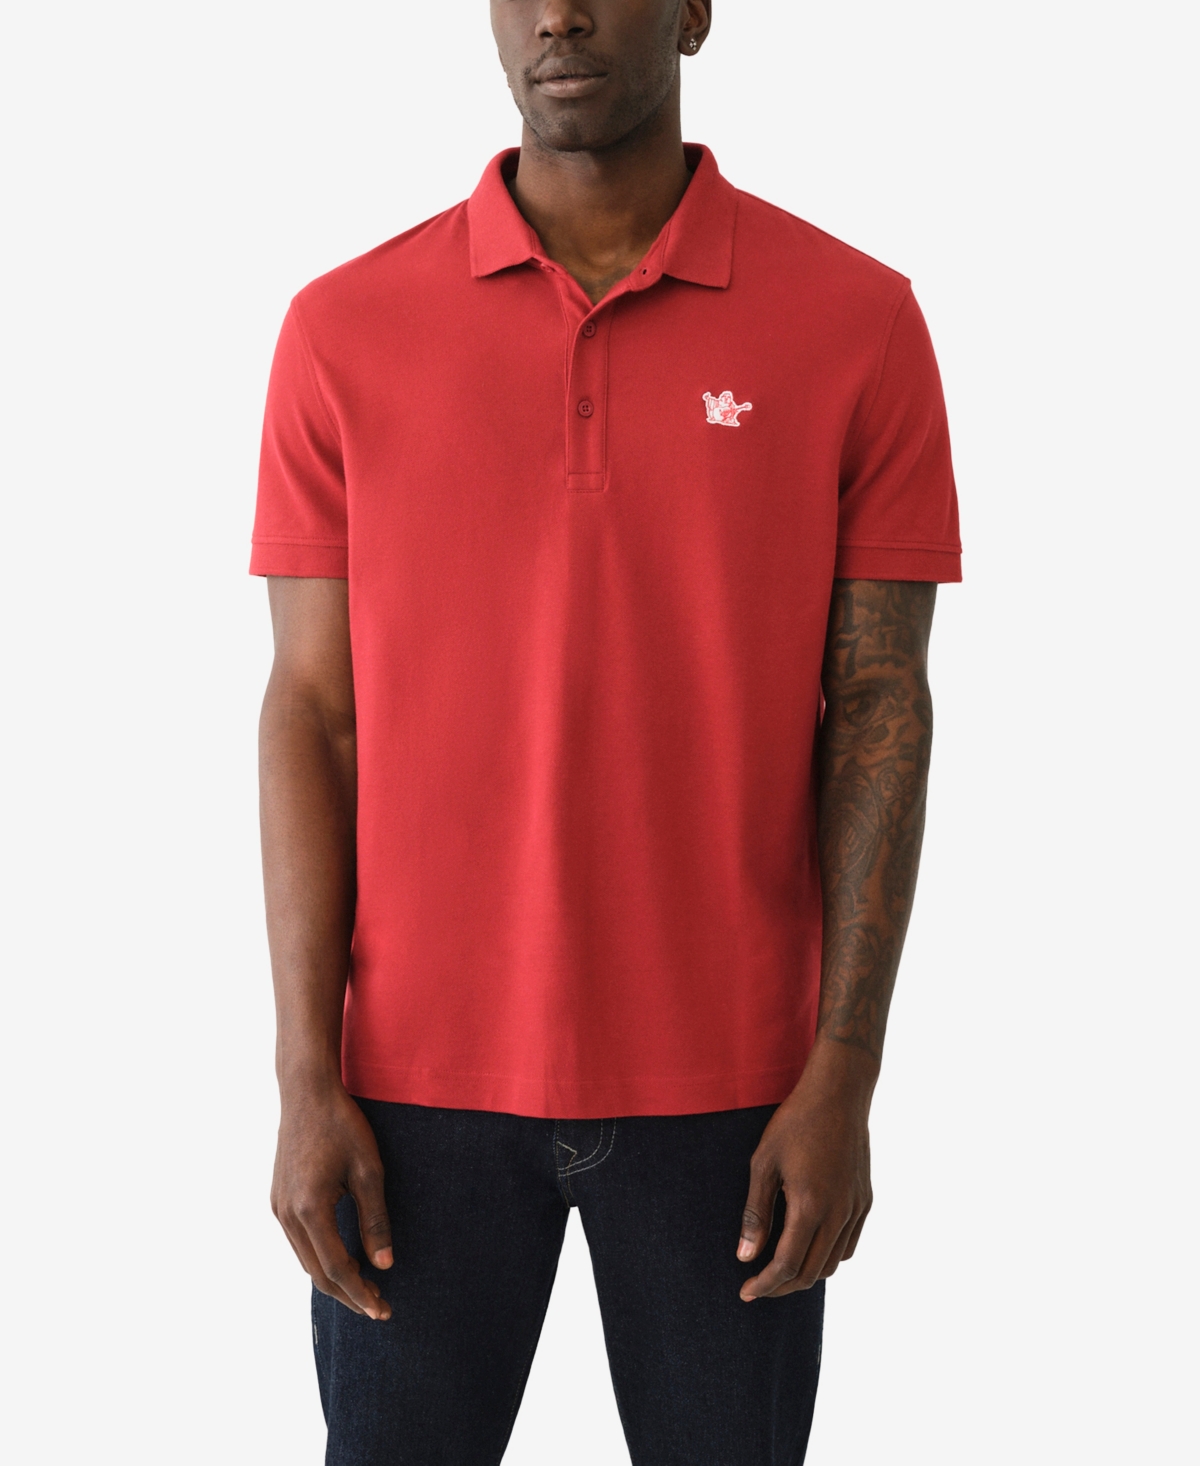 Men's Short Sleeve Relaxed Buddha Patch Polo Shirts - Red